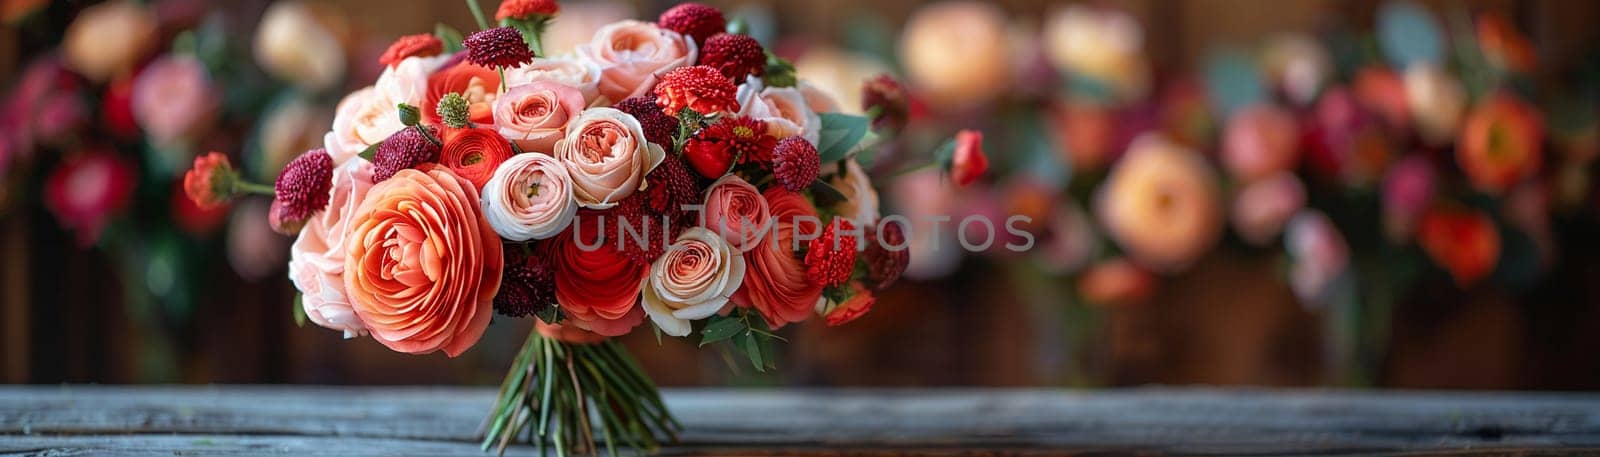 Florist Arranges Stunning Bouquets for Corporate Events by Benzoix